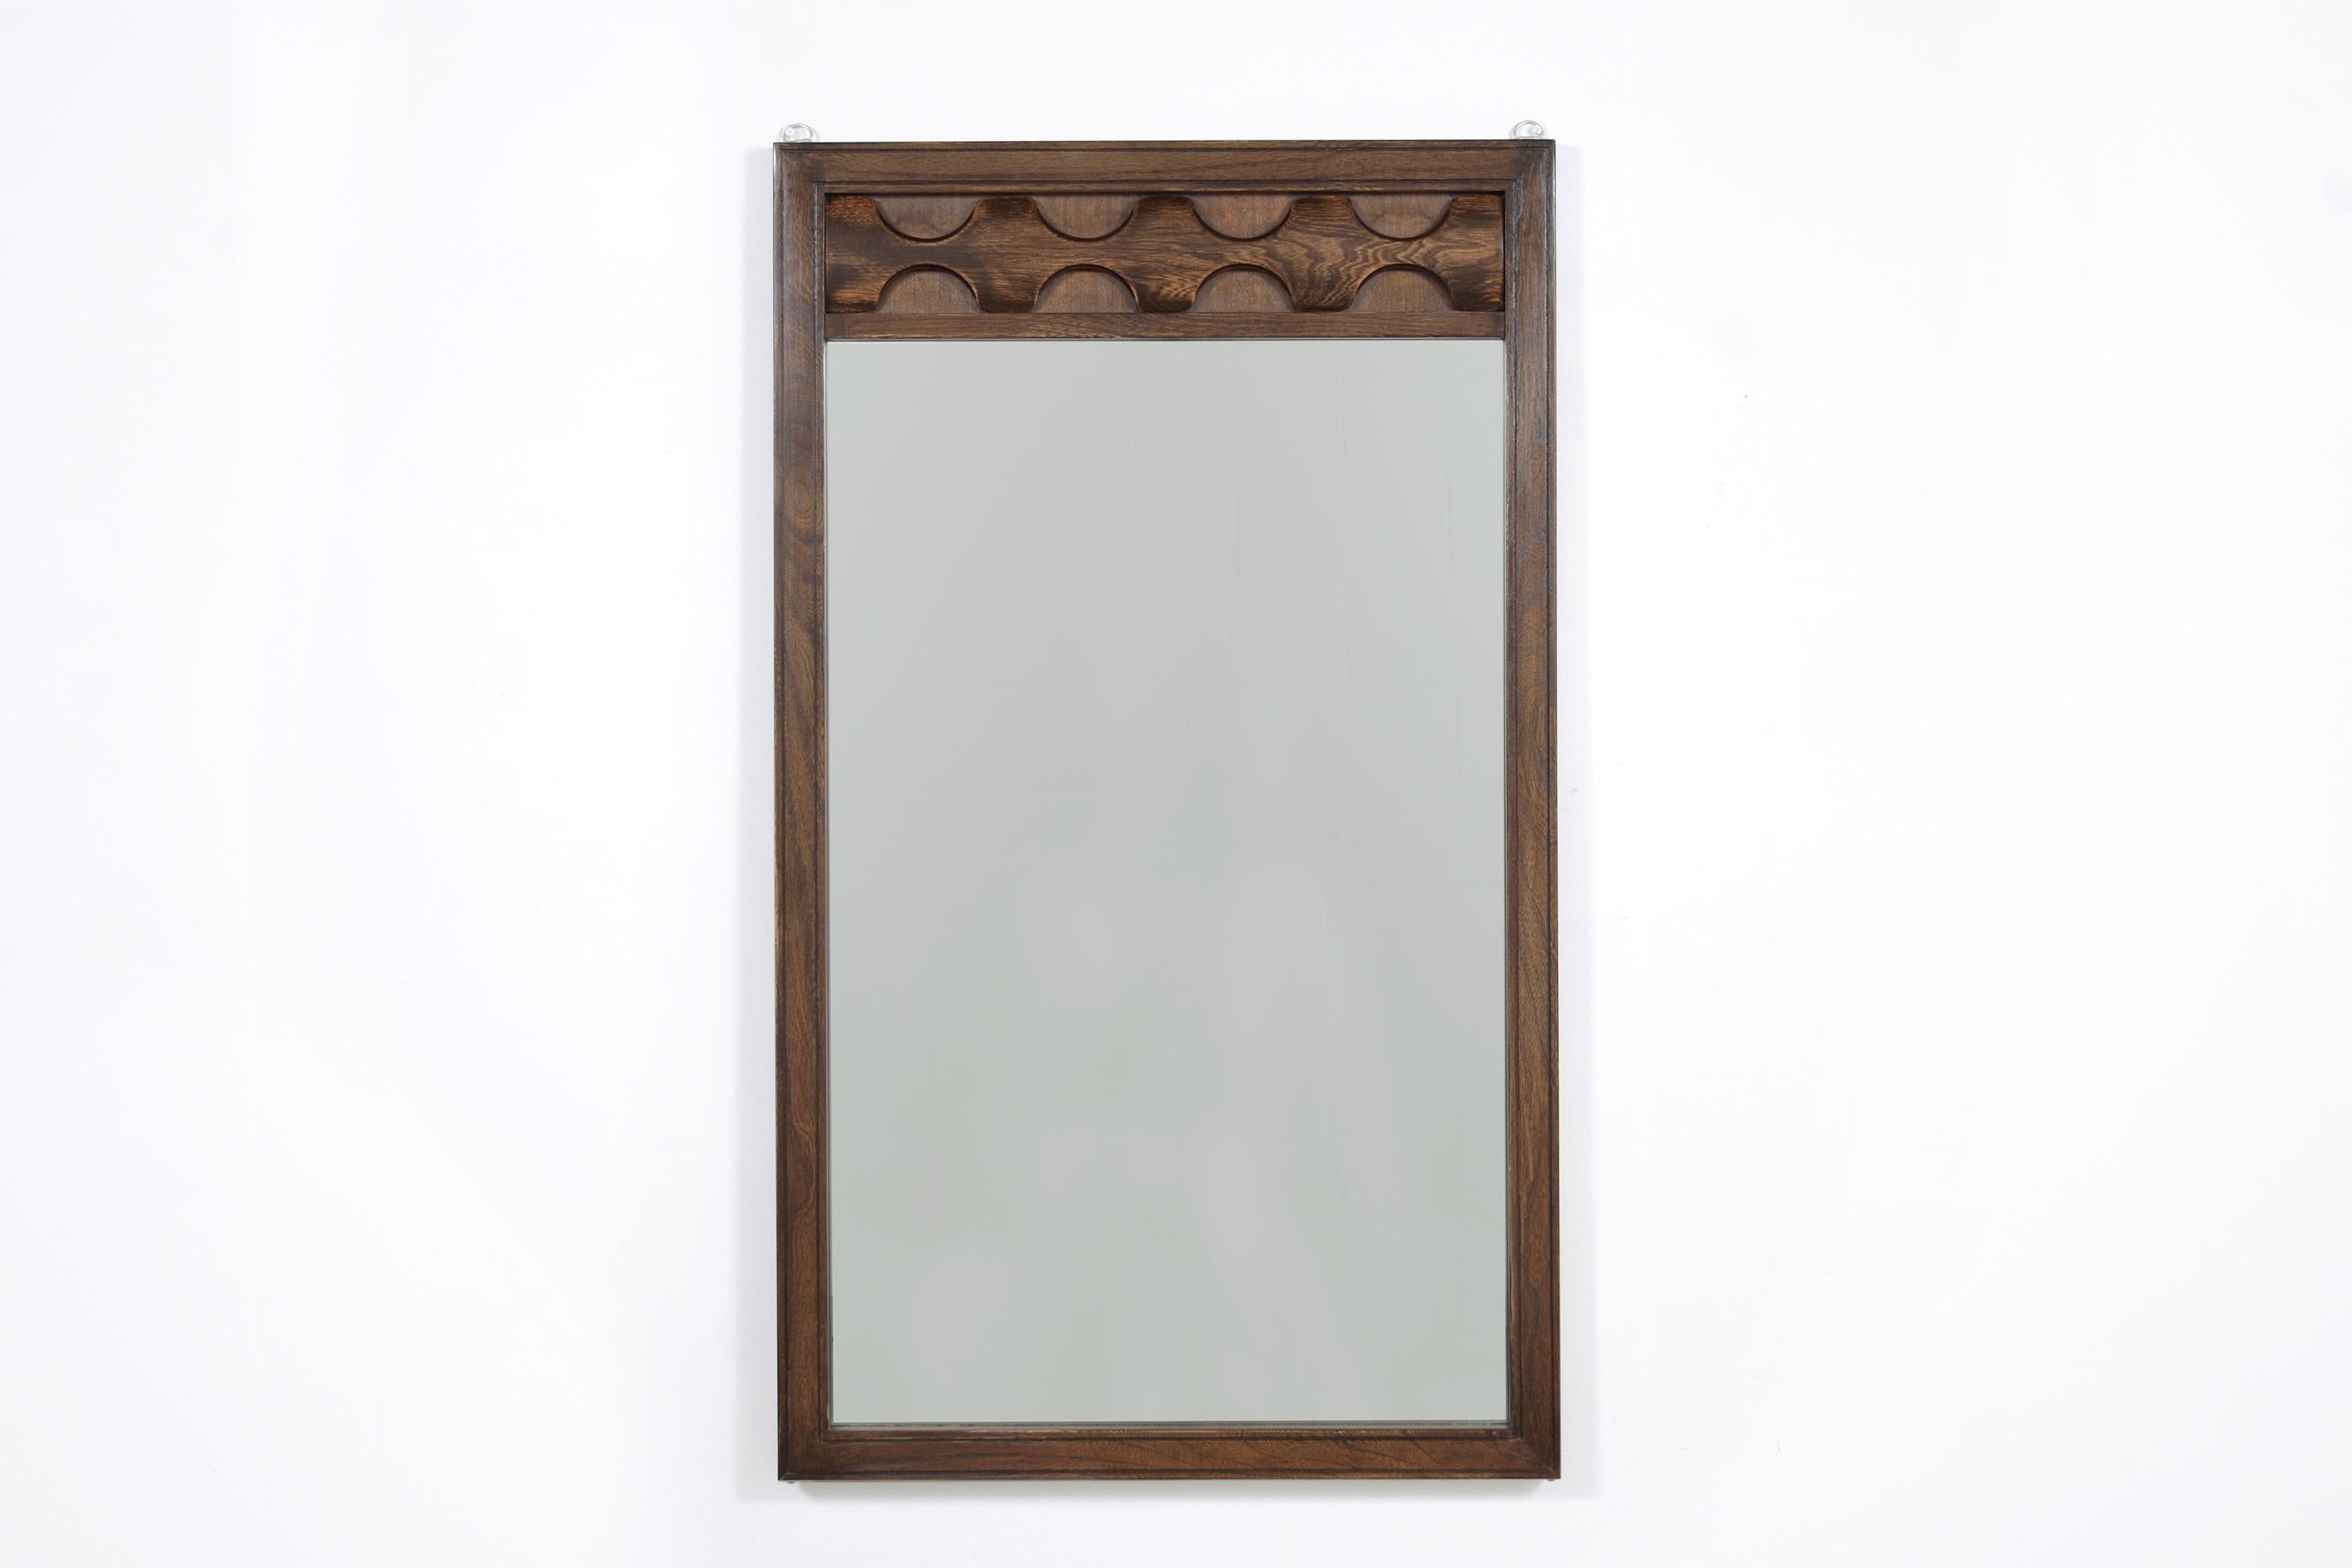 Dive into the captivating world of mid-century design with our exquisite Brutalist-style wall mirror from the 1960s. Every detail, from its masterfully handcrafted wooden frame to the intricately carved sculpted moldings, showcases the unmatched